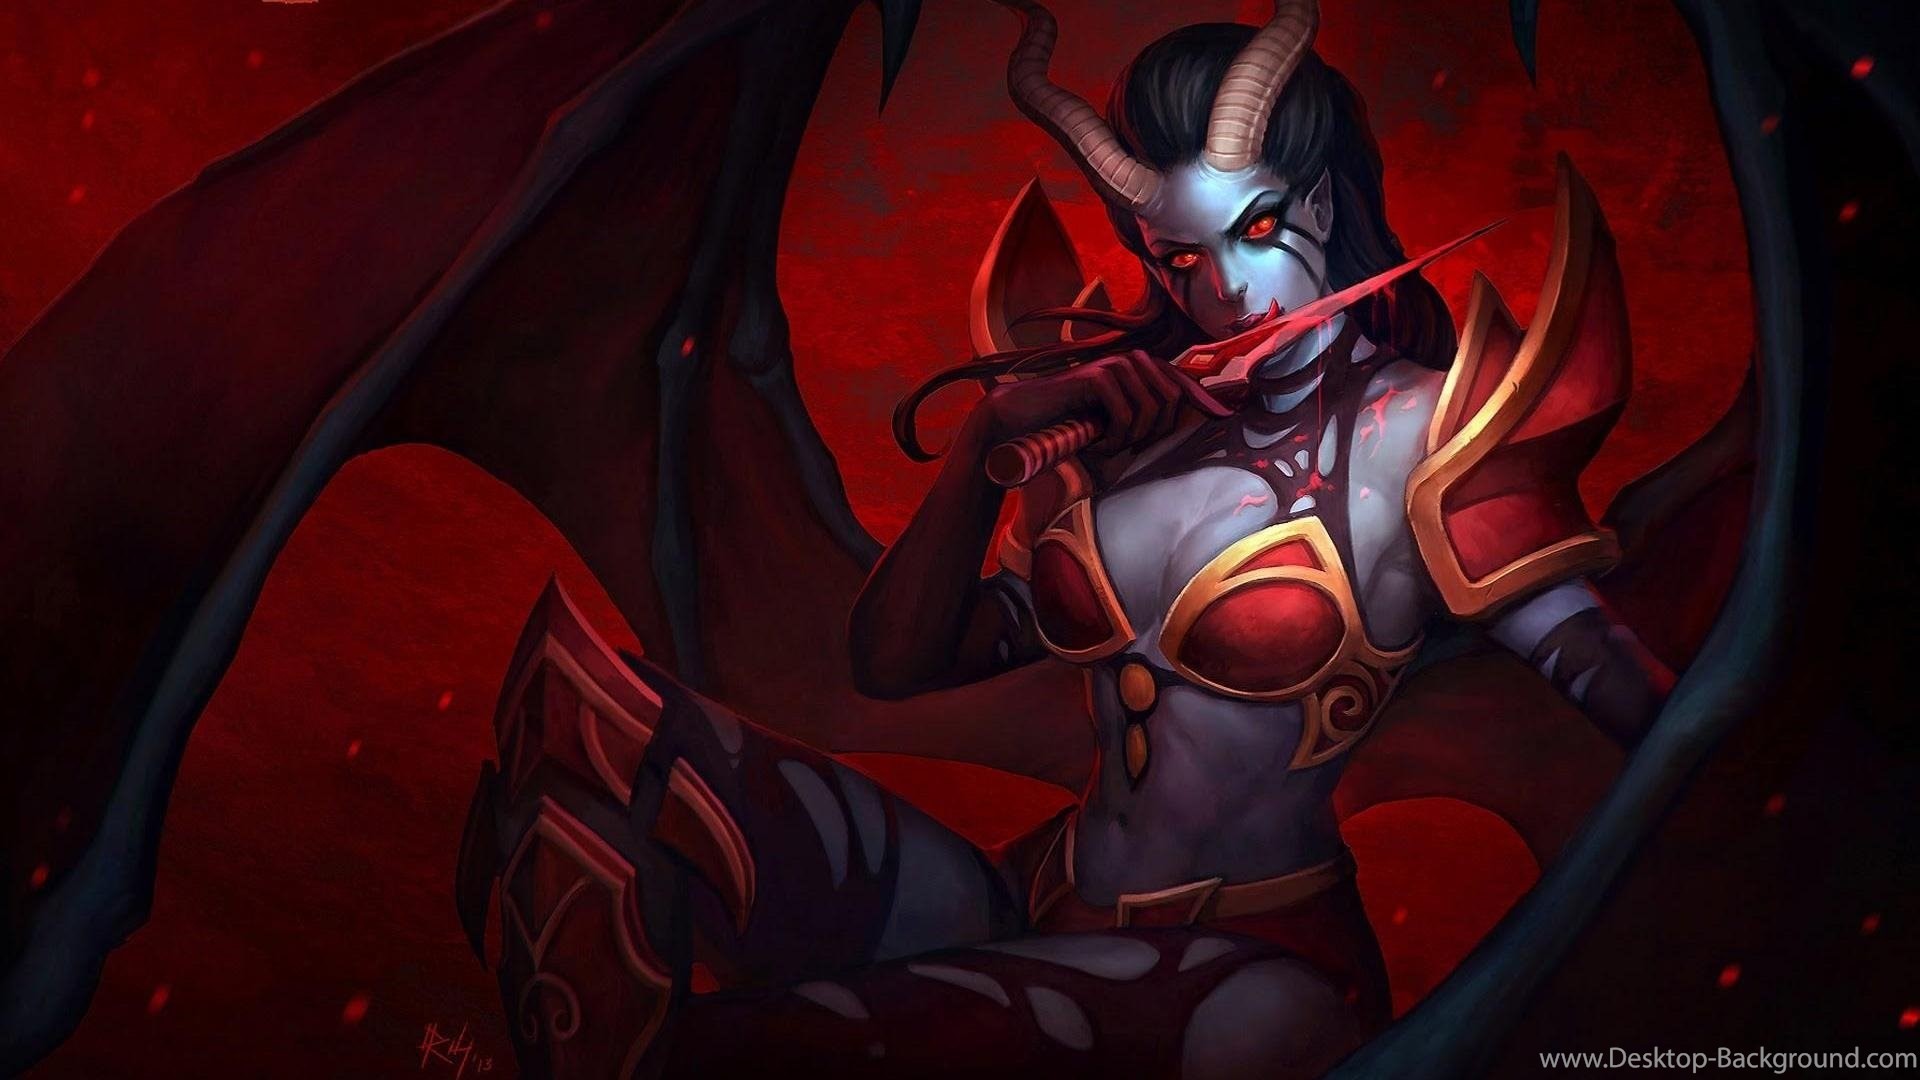 Wallpapers Hd Succubus Pictures